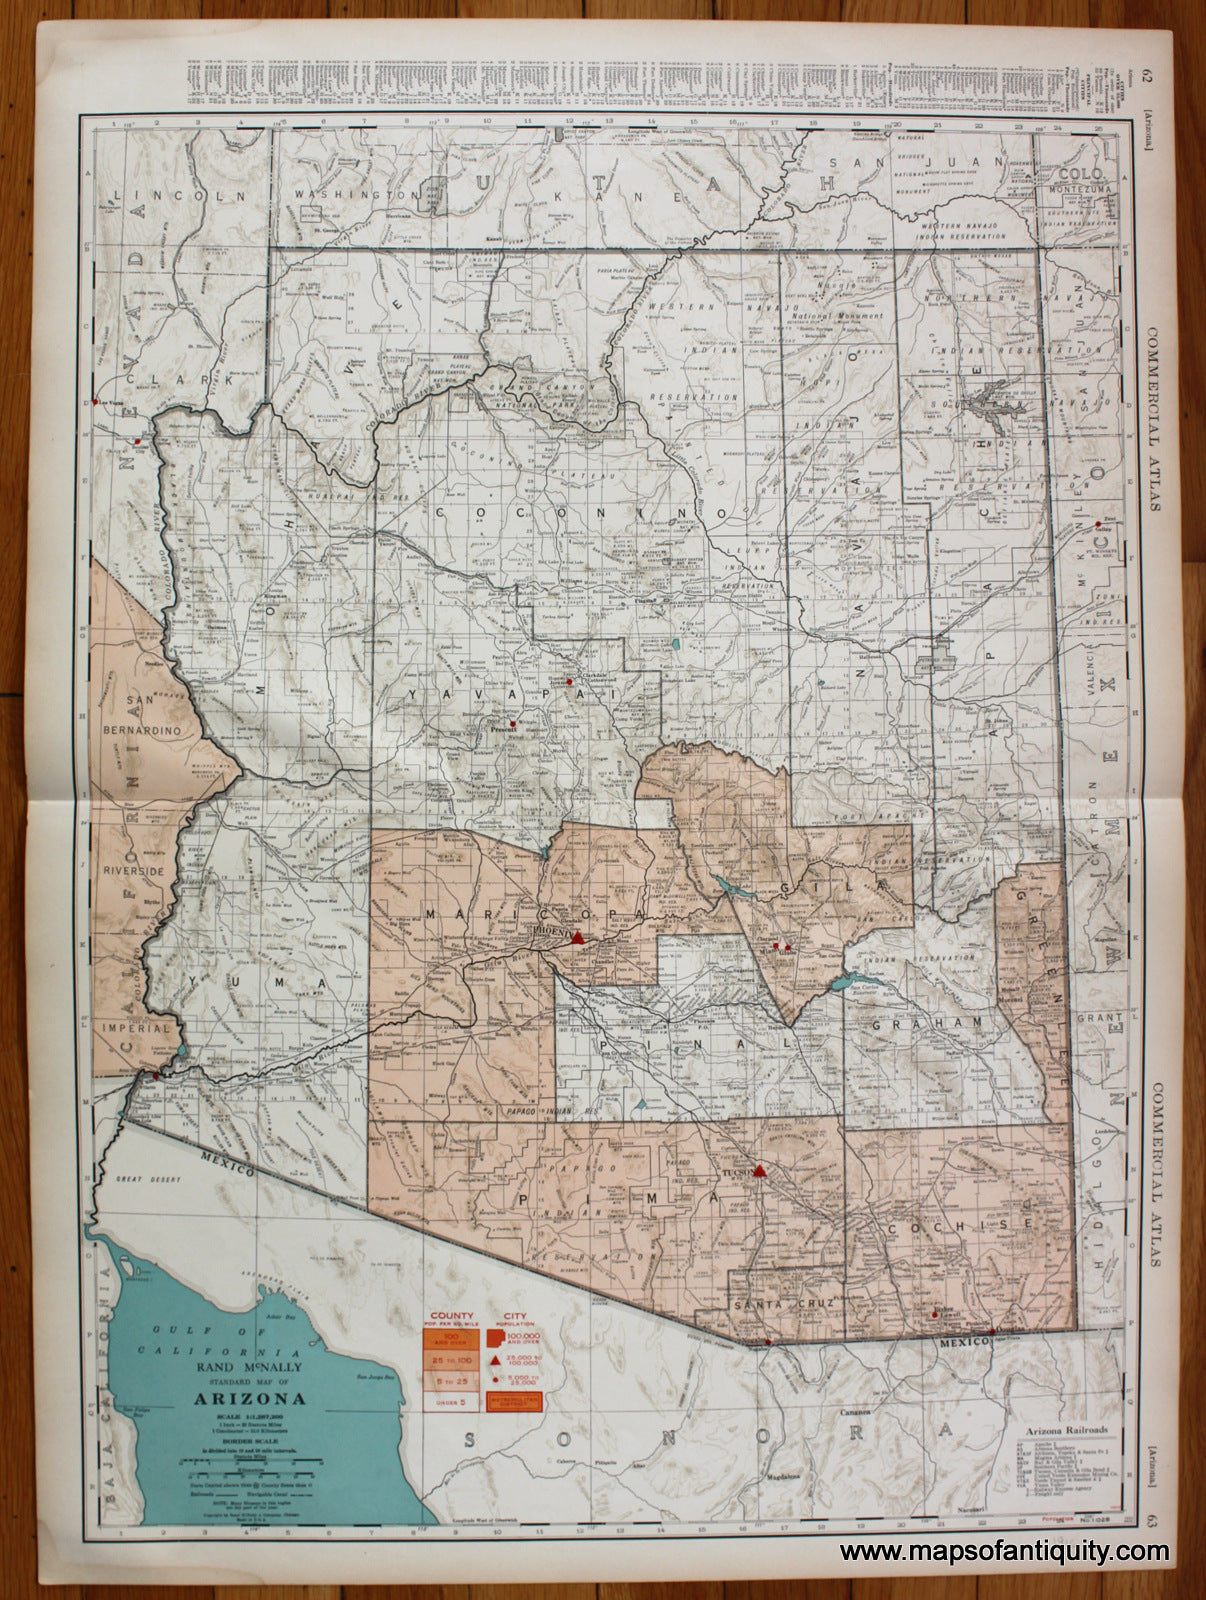 Antique-Printed-Color-Map-Rand-McNally-Standard-Map-of-Arizona-United-States-West-1934-Rand-McNally-Maps-Of-Antiquity